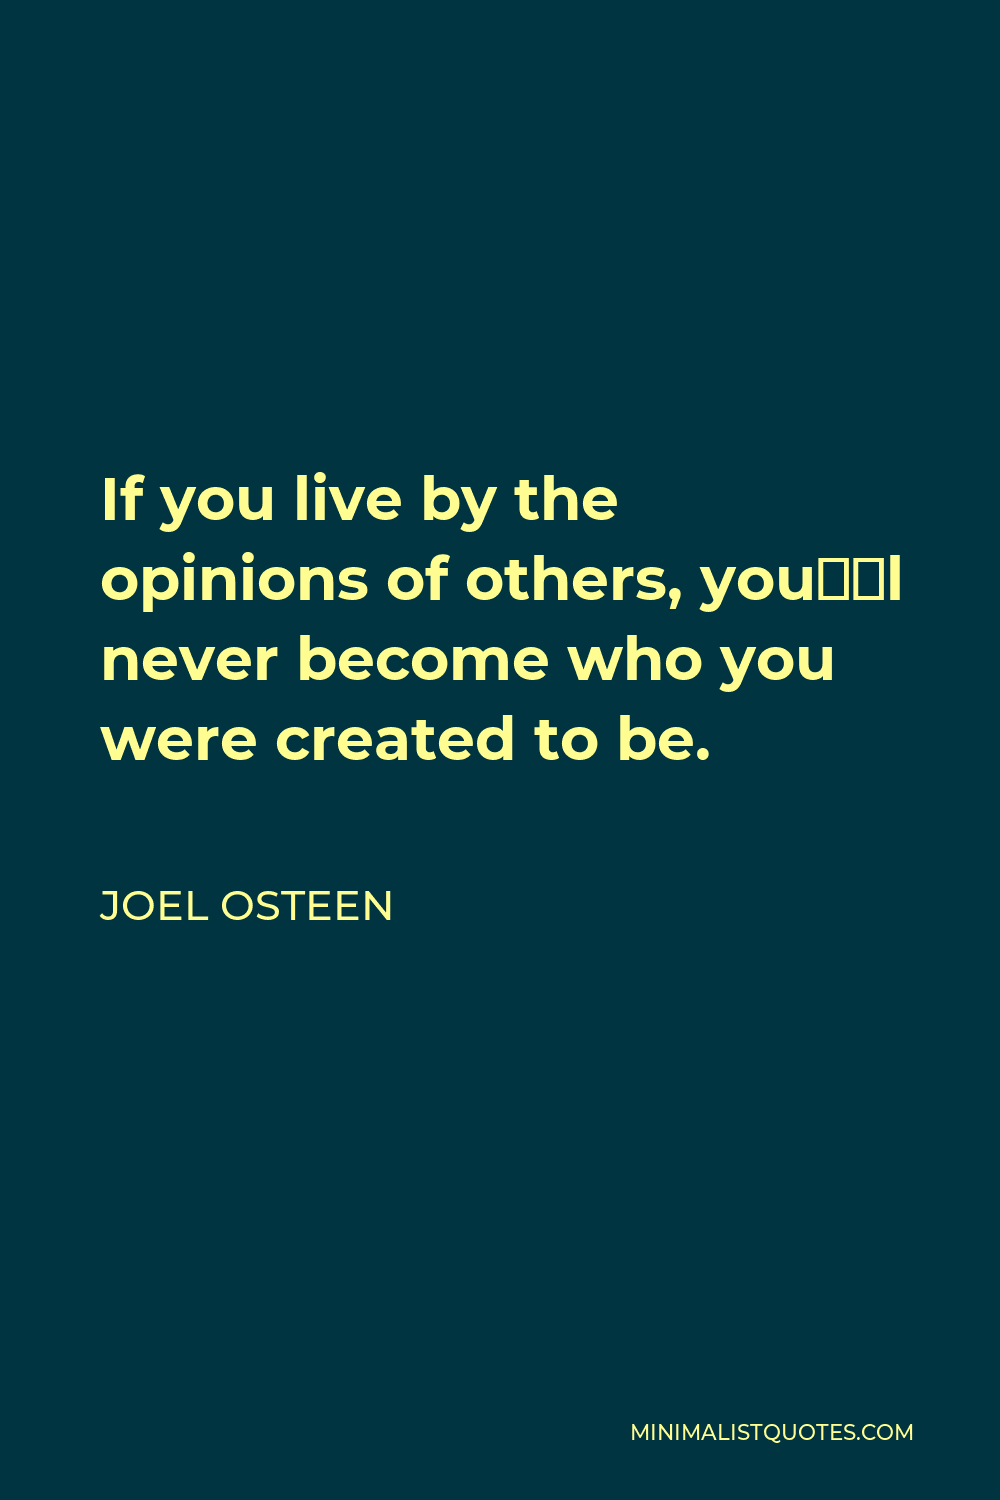 Joel Osteen Quote - If you live by the opinions of others, you’ll never become who you were created to be.